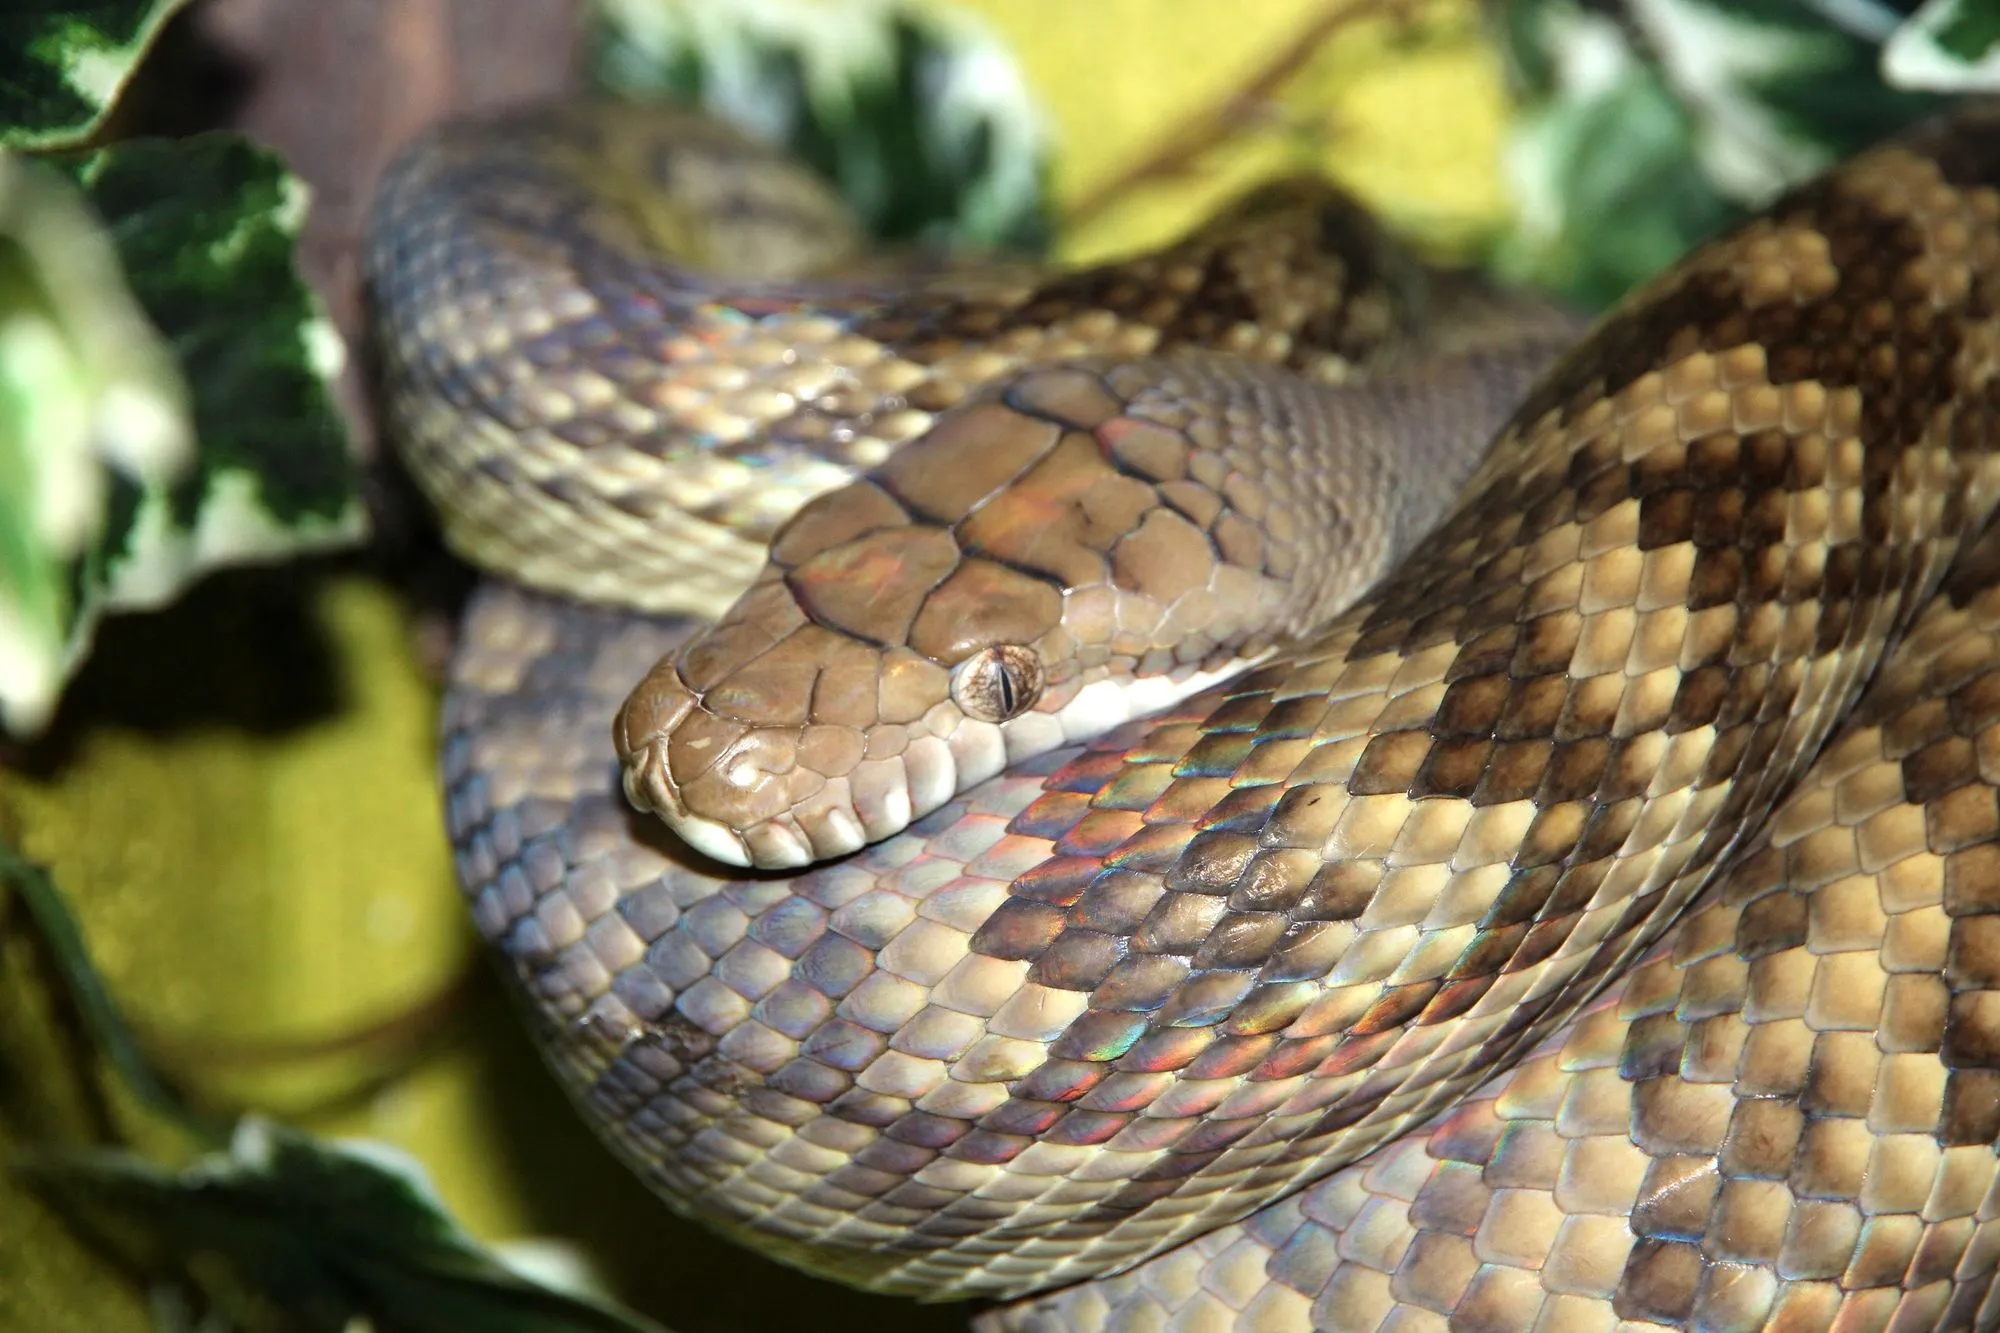 The amethystine python size is one of the most fascinating features it has.